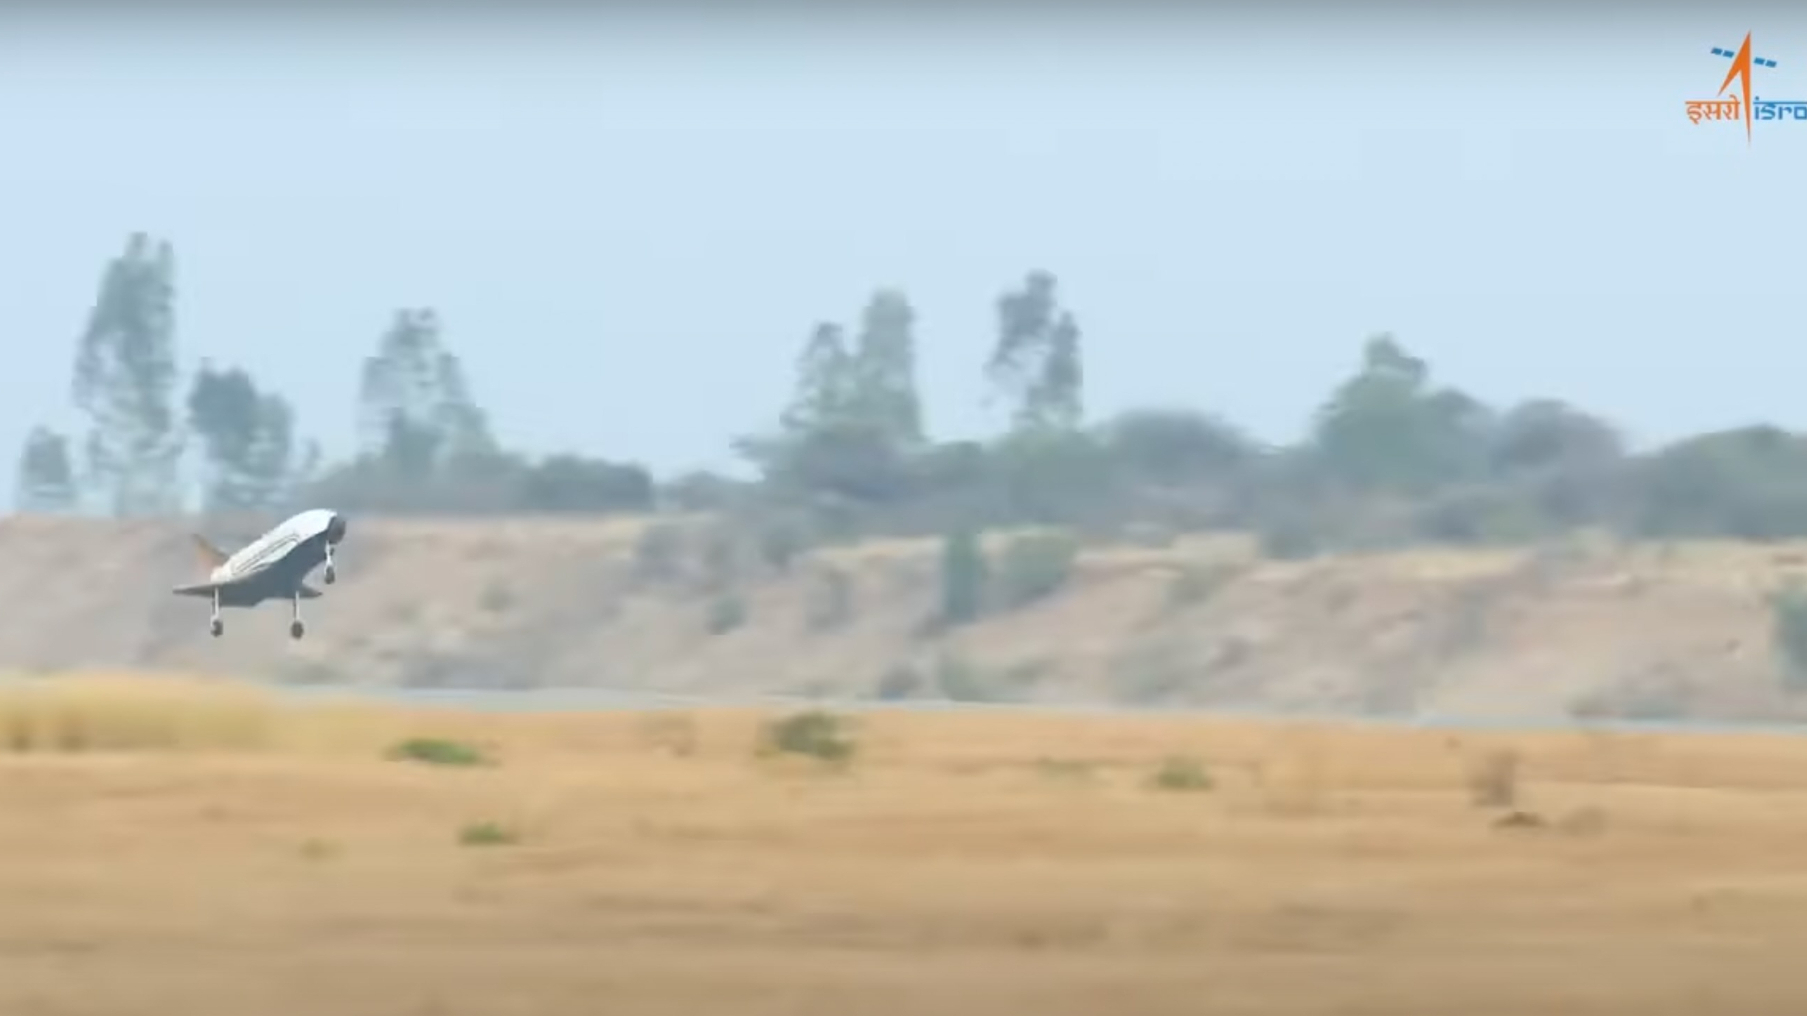 Watch India’s prototype space plane ace a landing test (video) Space